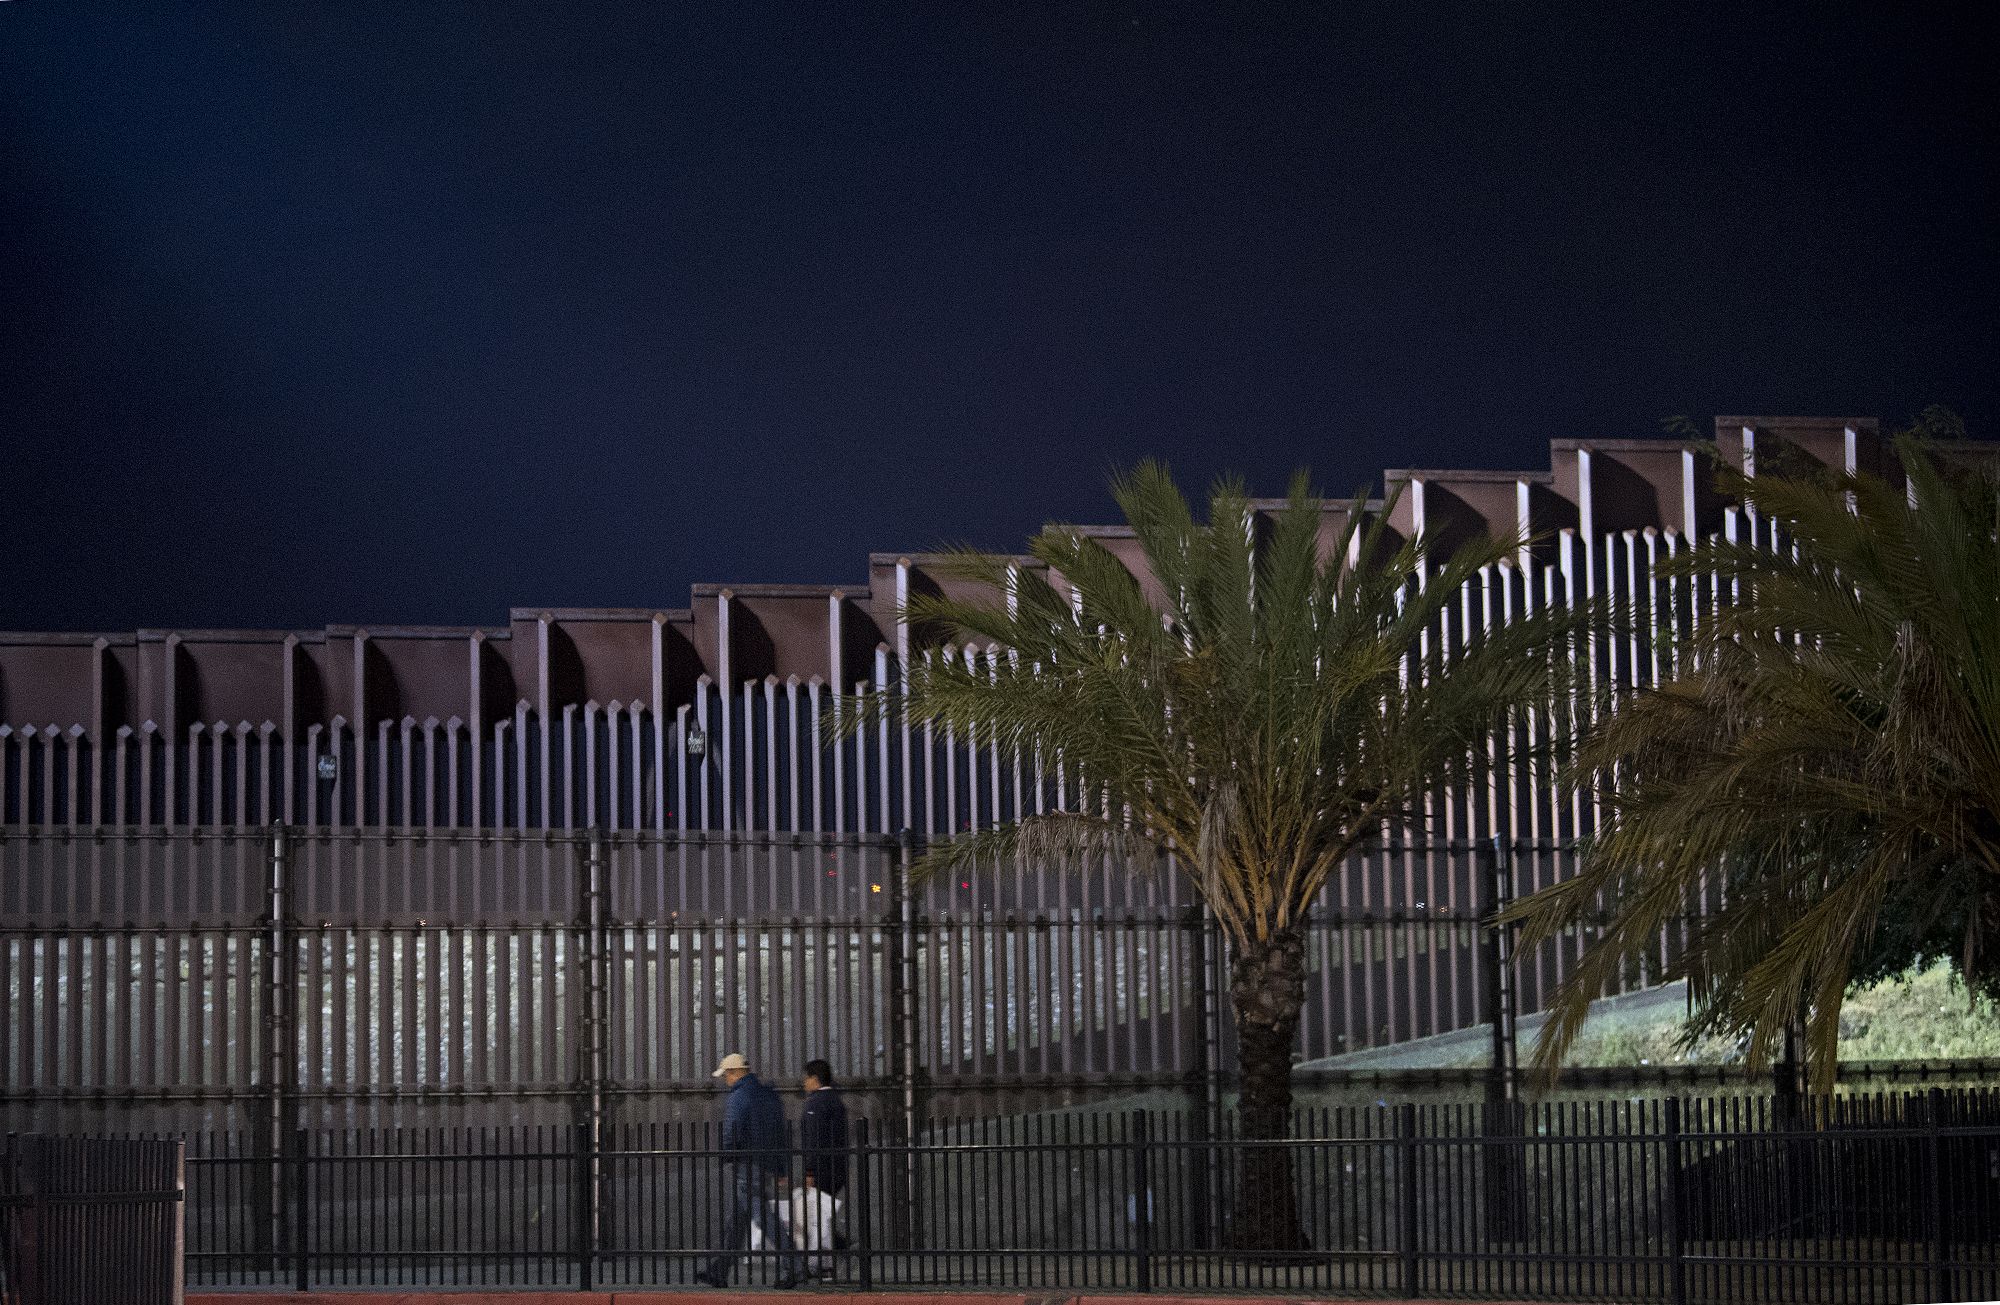 Pedestrians stroll near the border wall on foot from the United States side Nov. 27. Image by Amanda Cowan. United States, 2019.